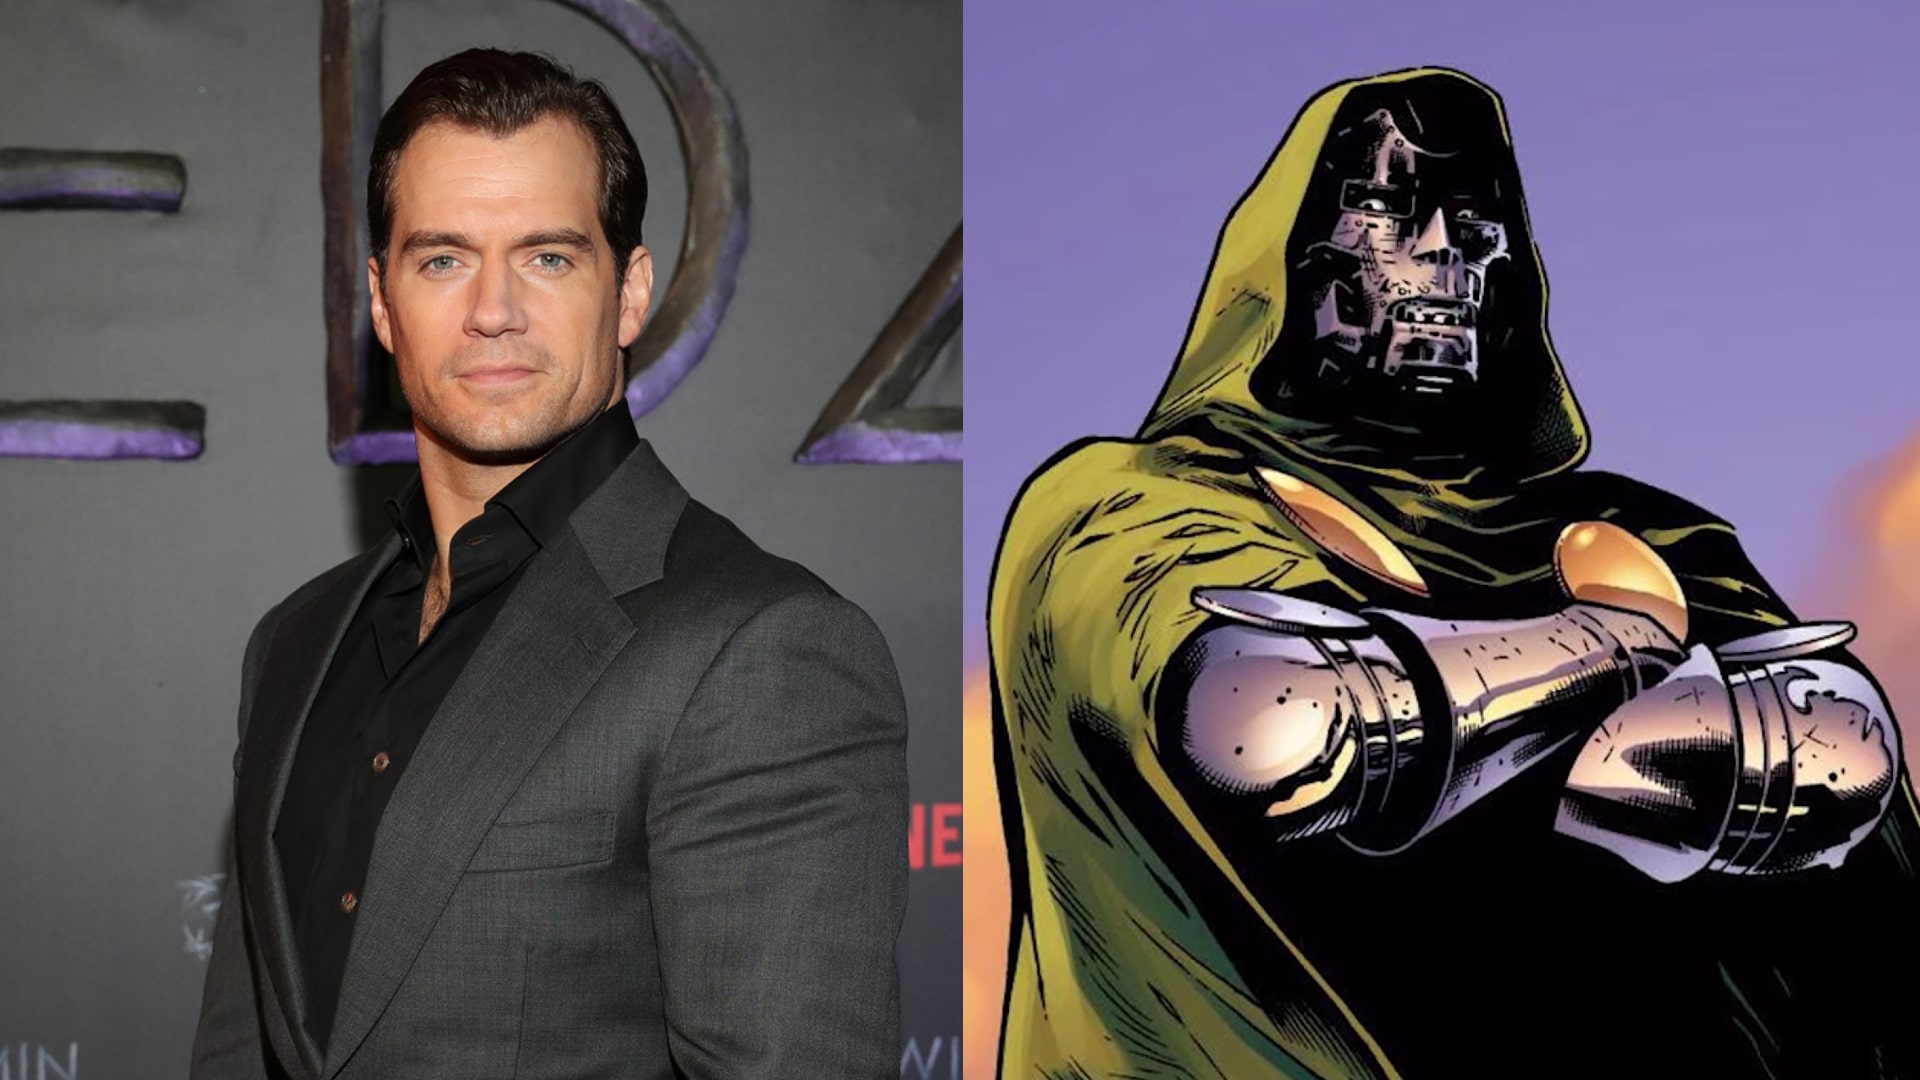 Henry Cavill Confirmed Joining The Mcu, No Official Role Confirmed